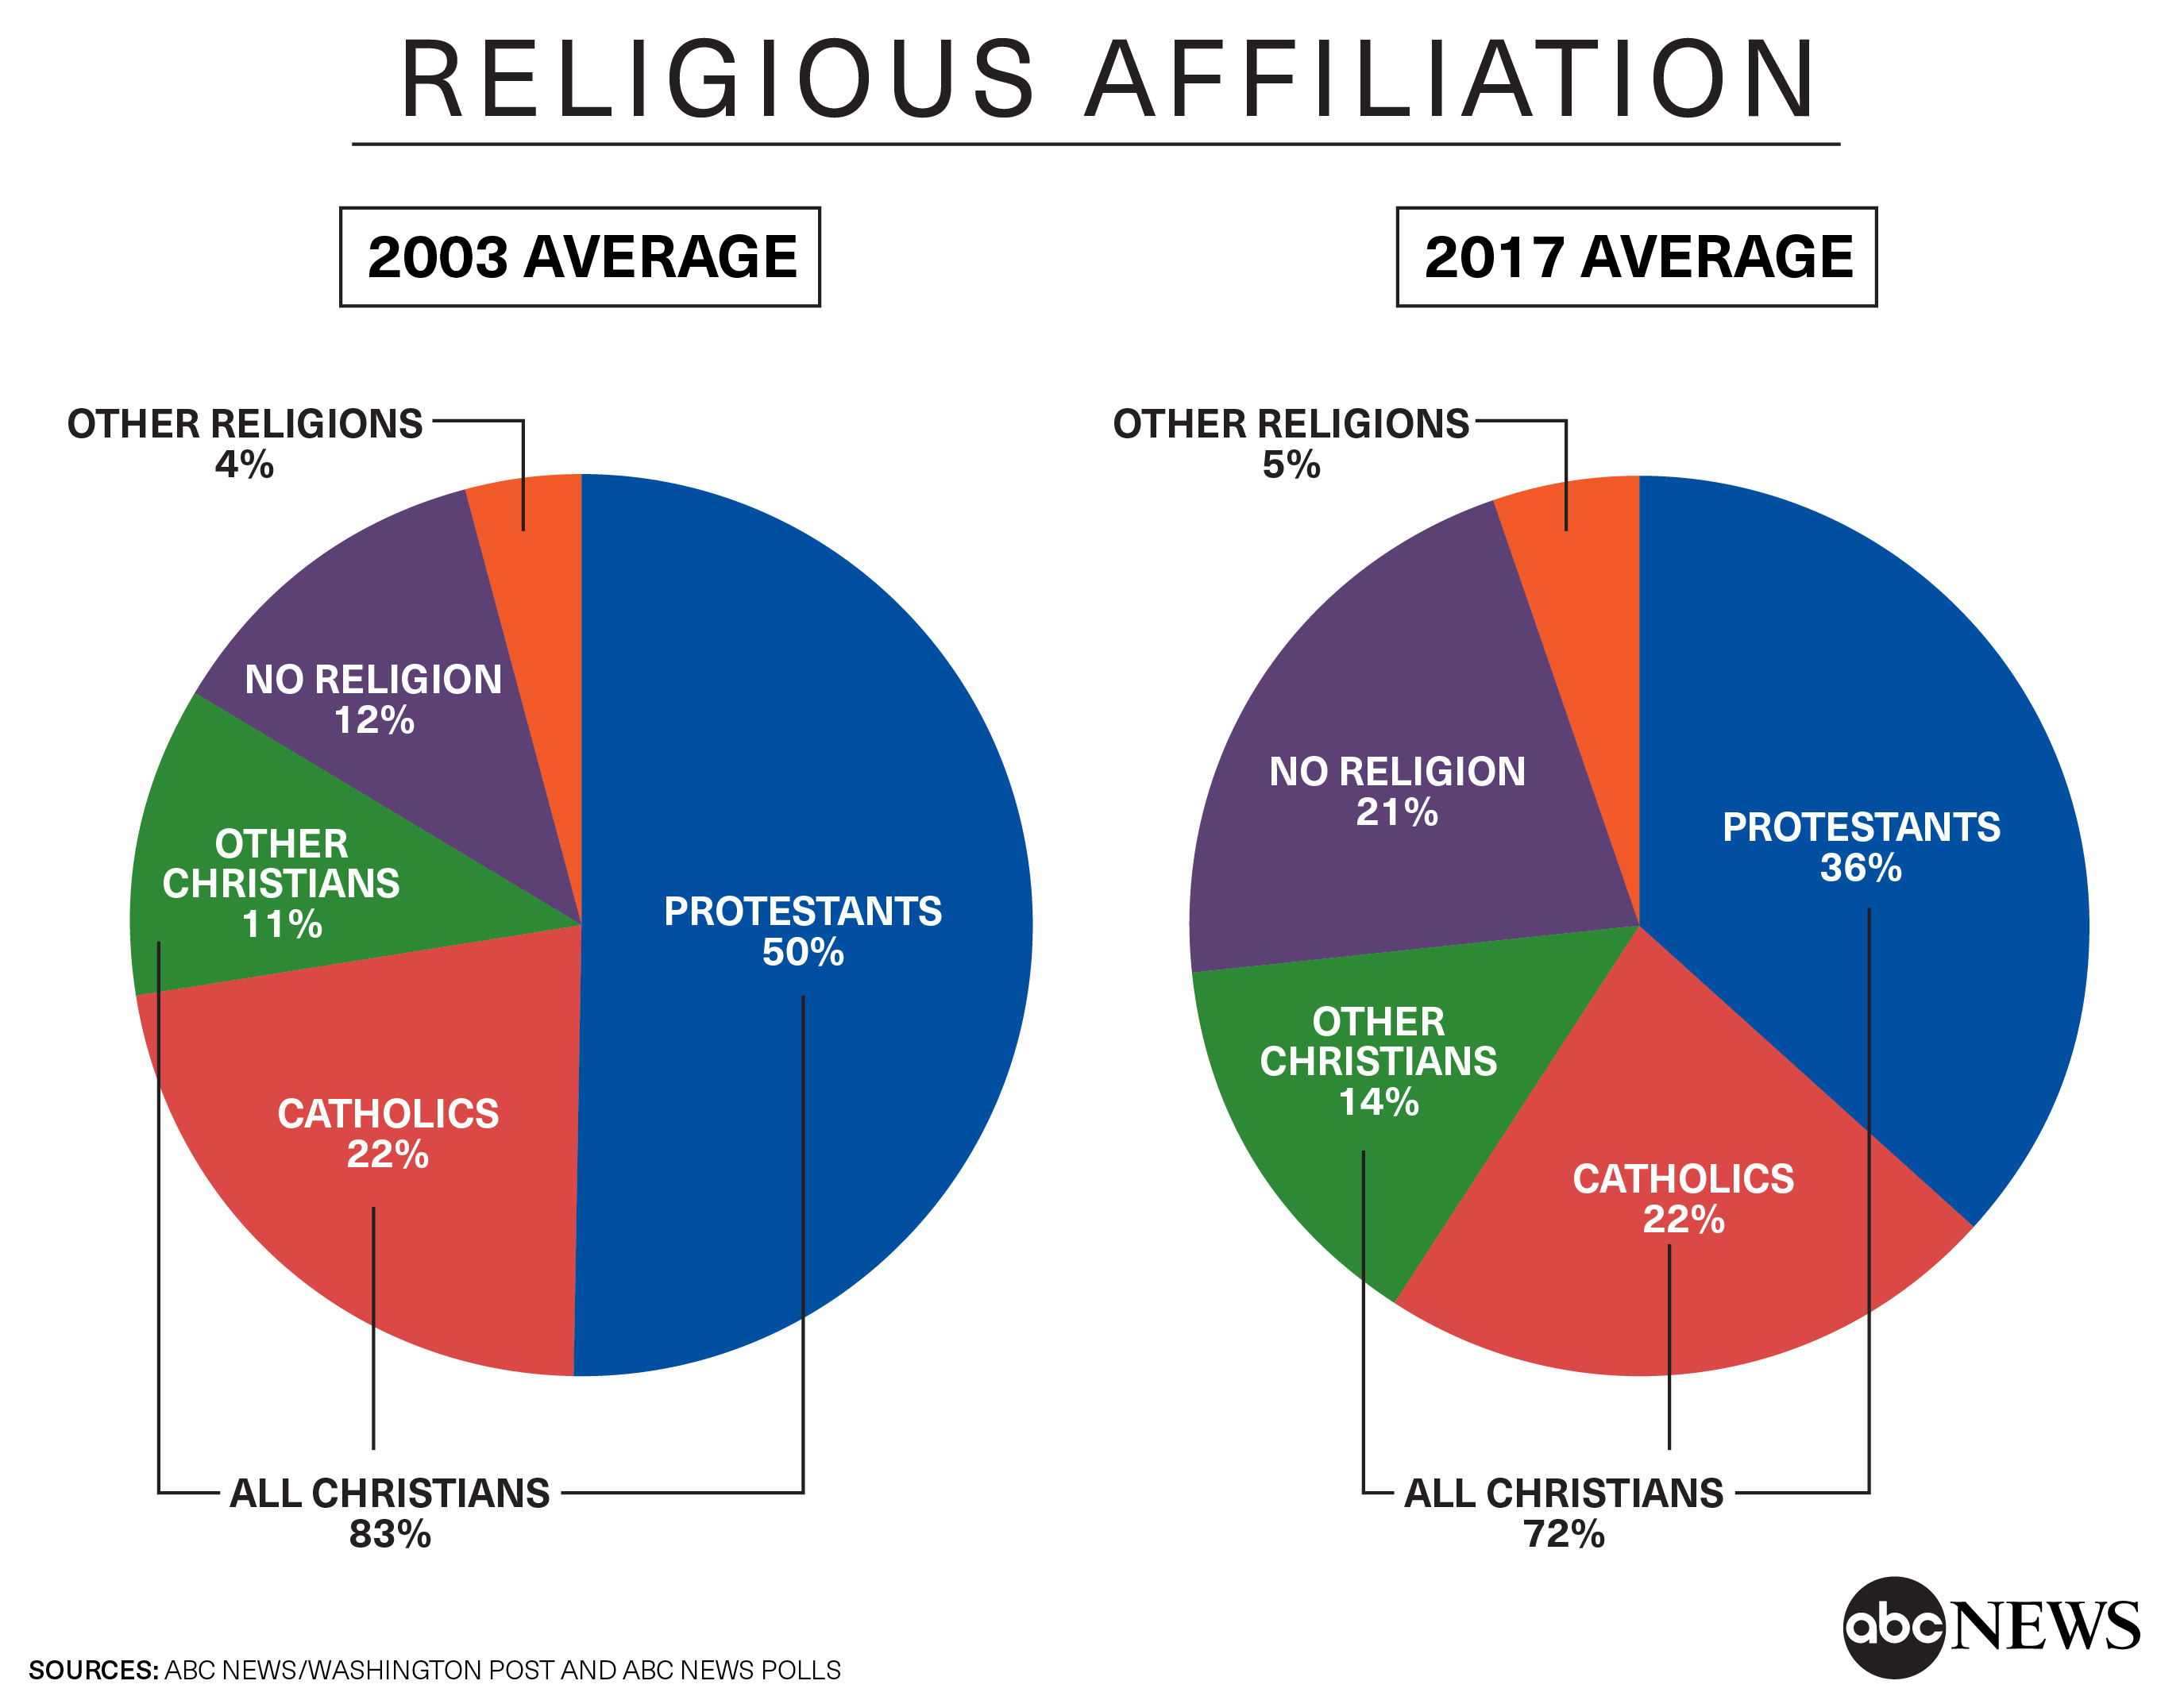 Main Religions In Us